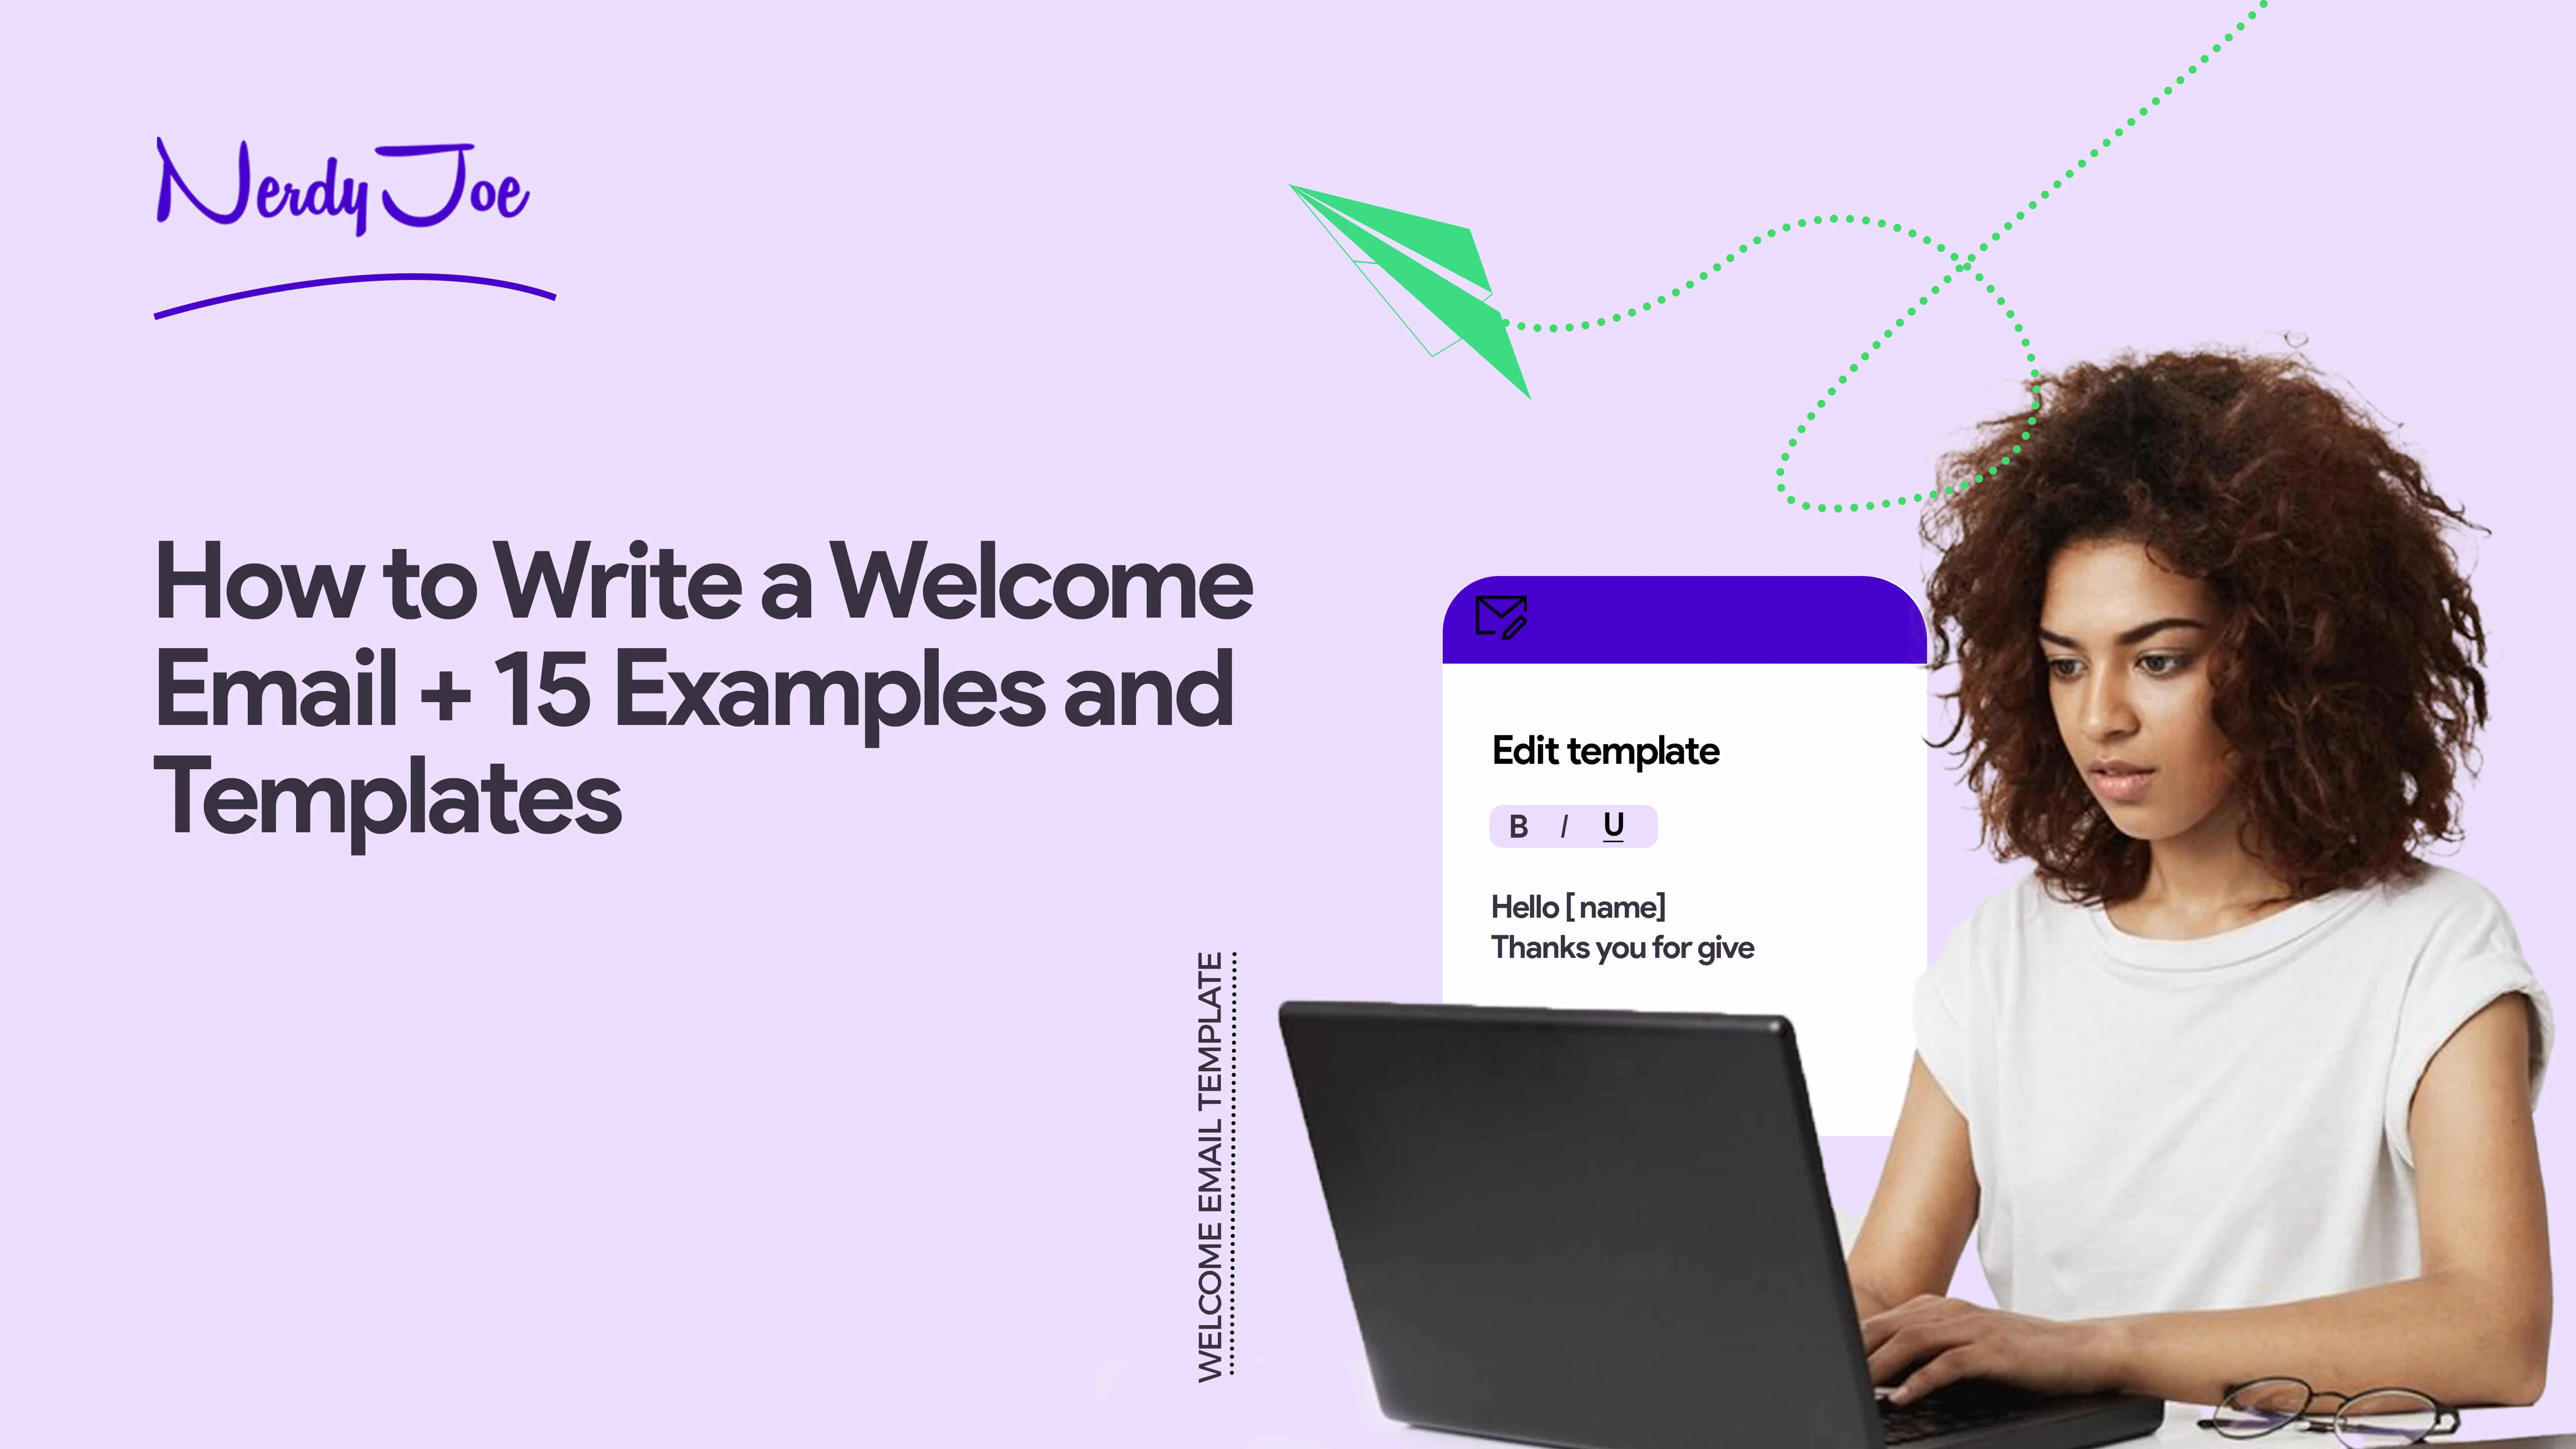 How to Write a Welcome Email With 15 Examples